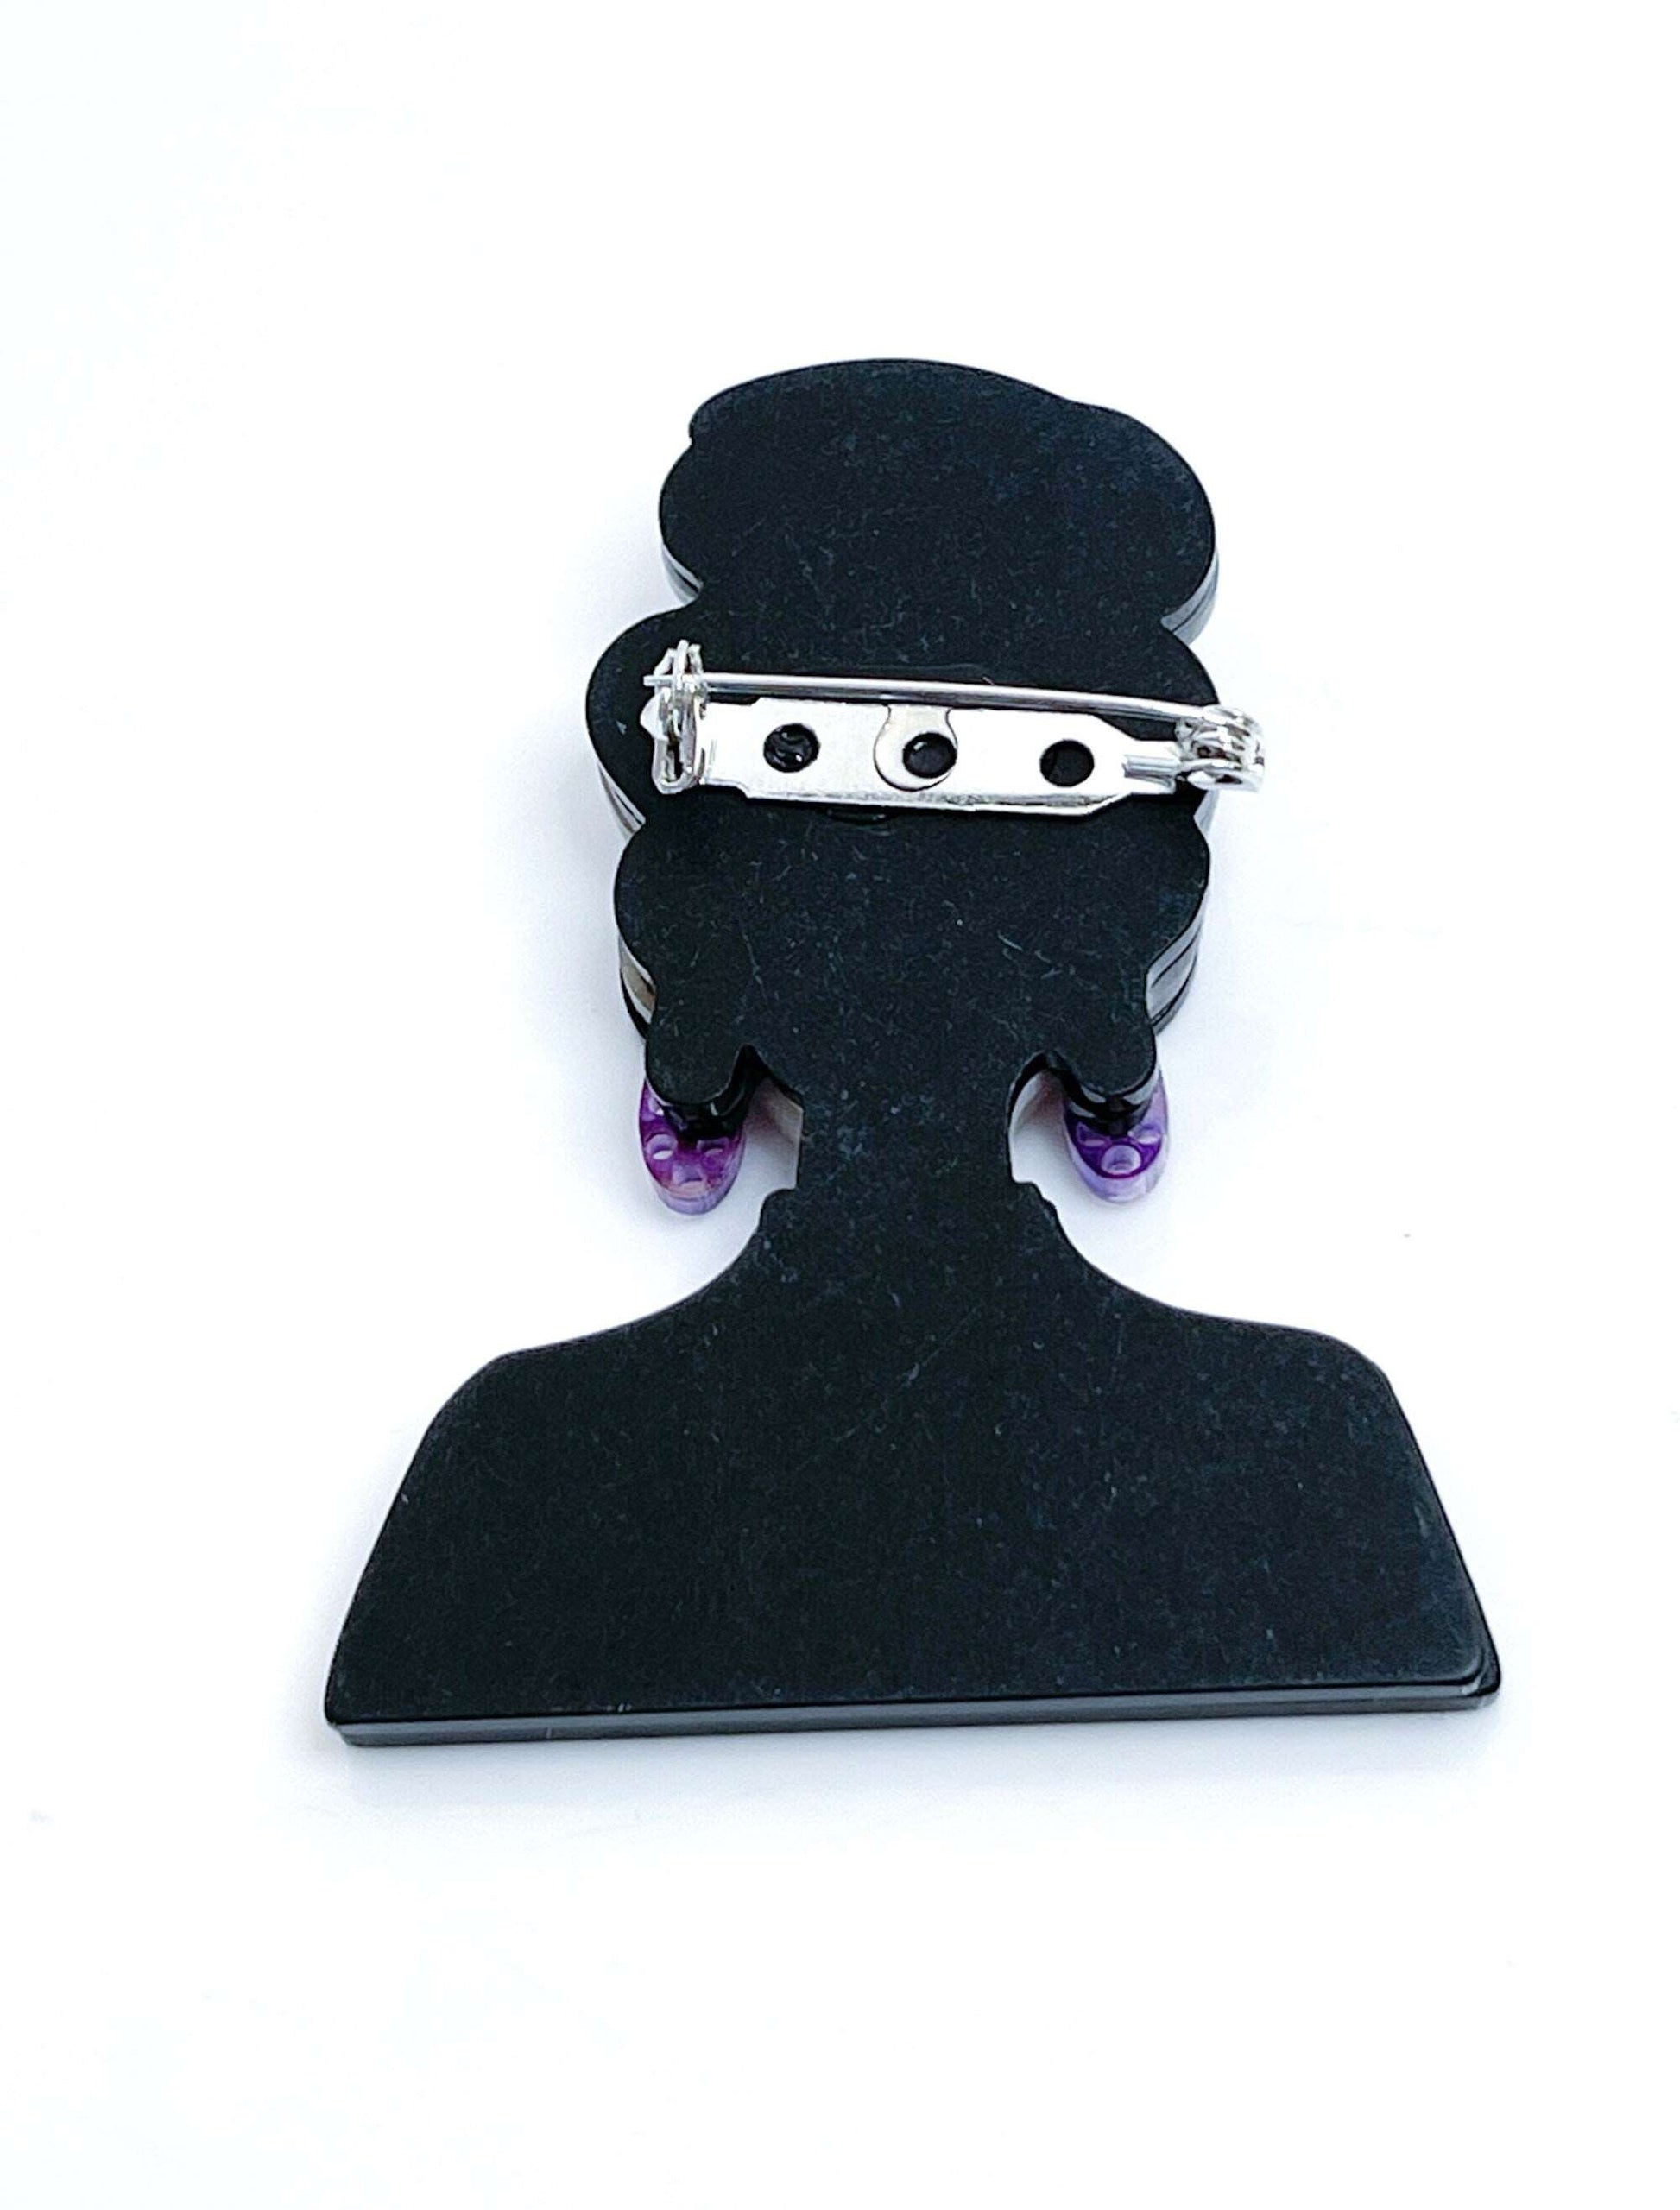 Chic French Style Lady Brooch, Fun Lady in Sunglasses, Fashion Pin for Jacket Scarf, Paris Lady Pin, Brooches For Women